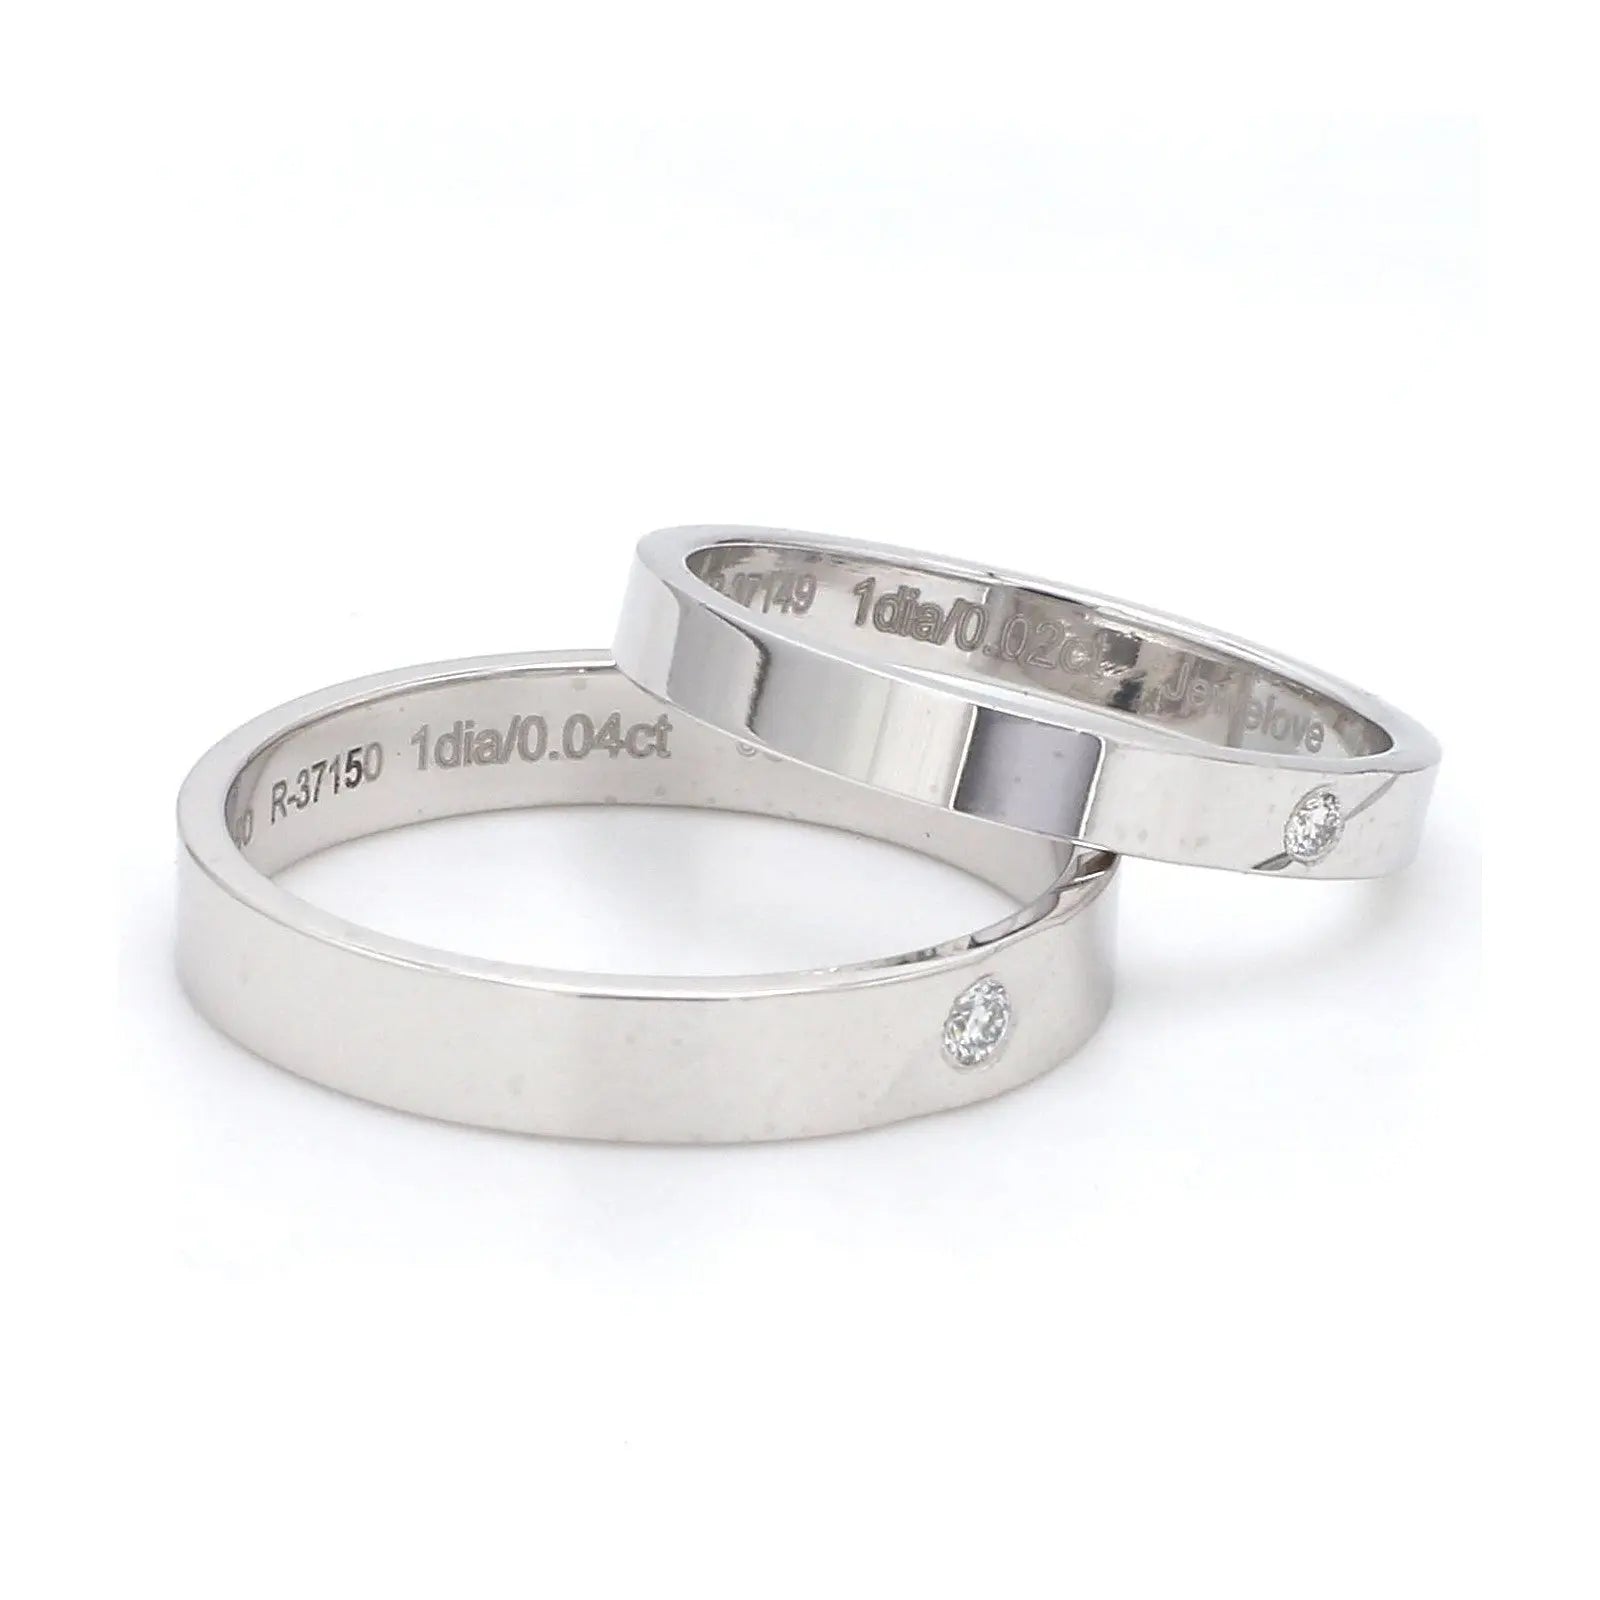 Rings : Personalized Wedding Date Ring, 14K White Gold